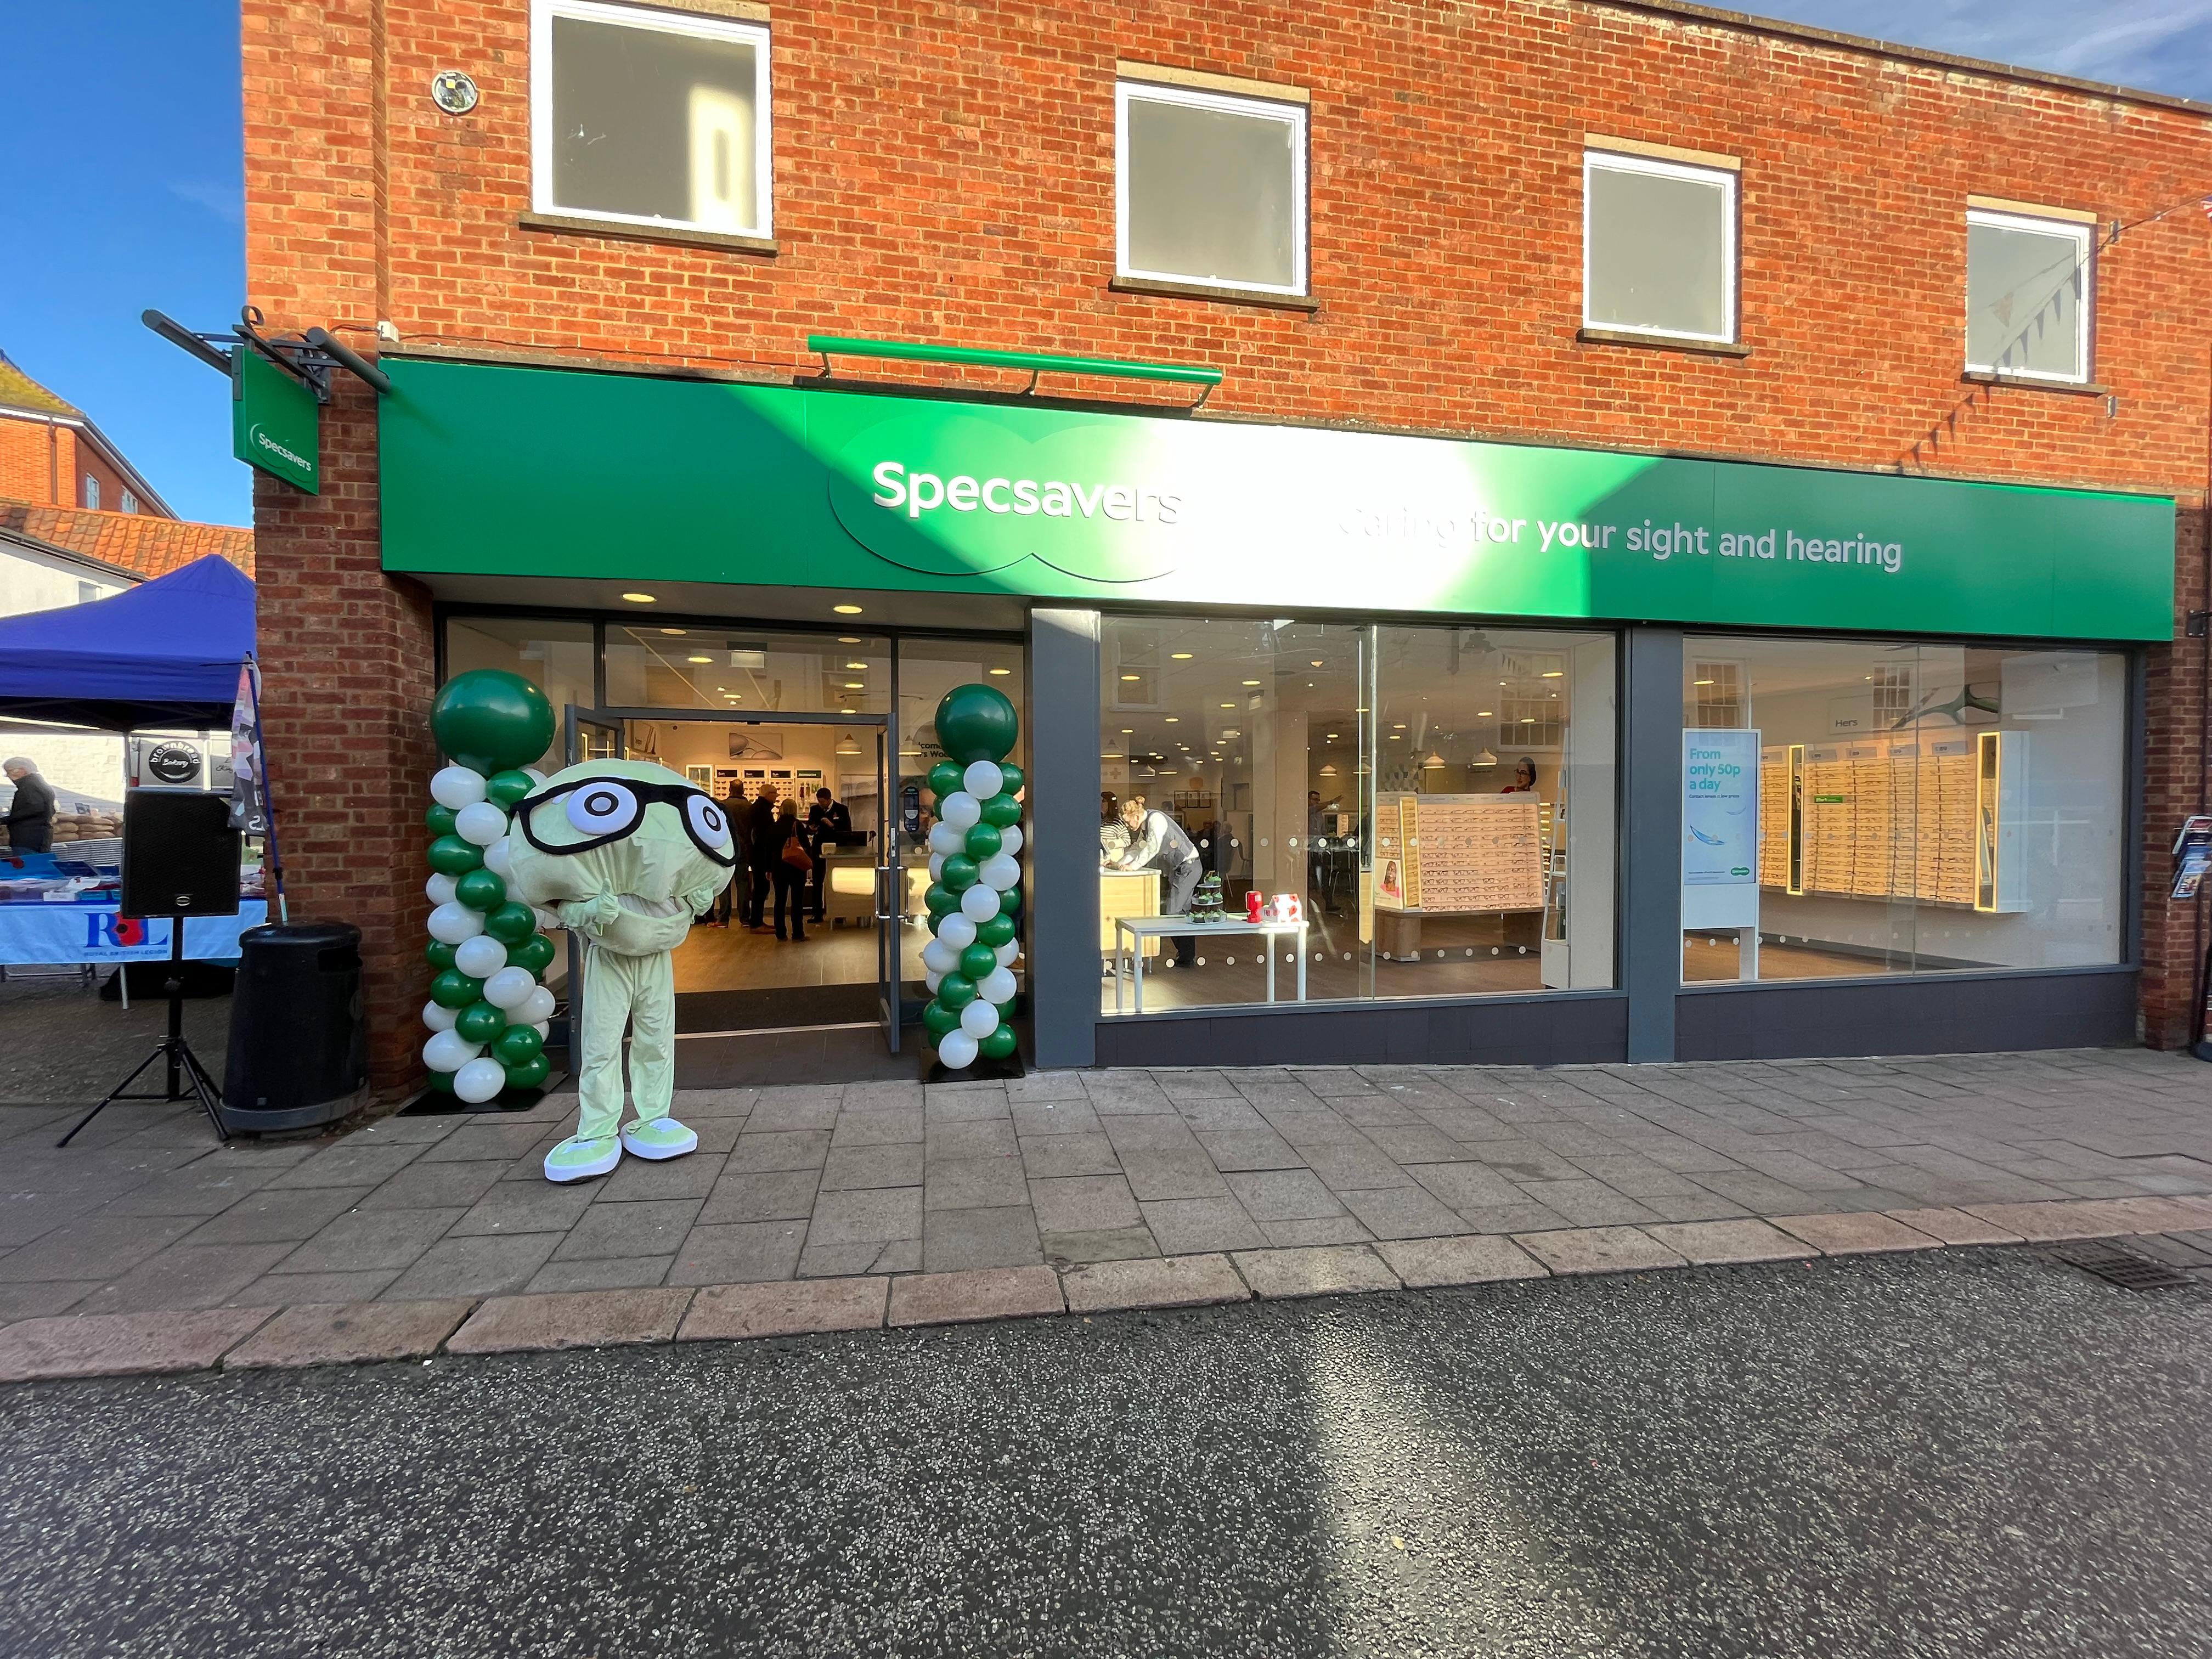 Images Specsavers Opticians and Audiologists - Woodbridge